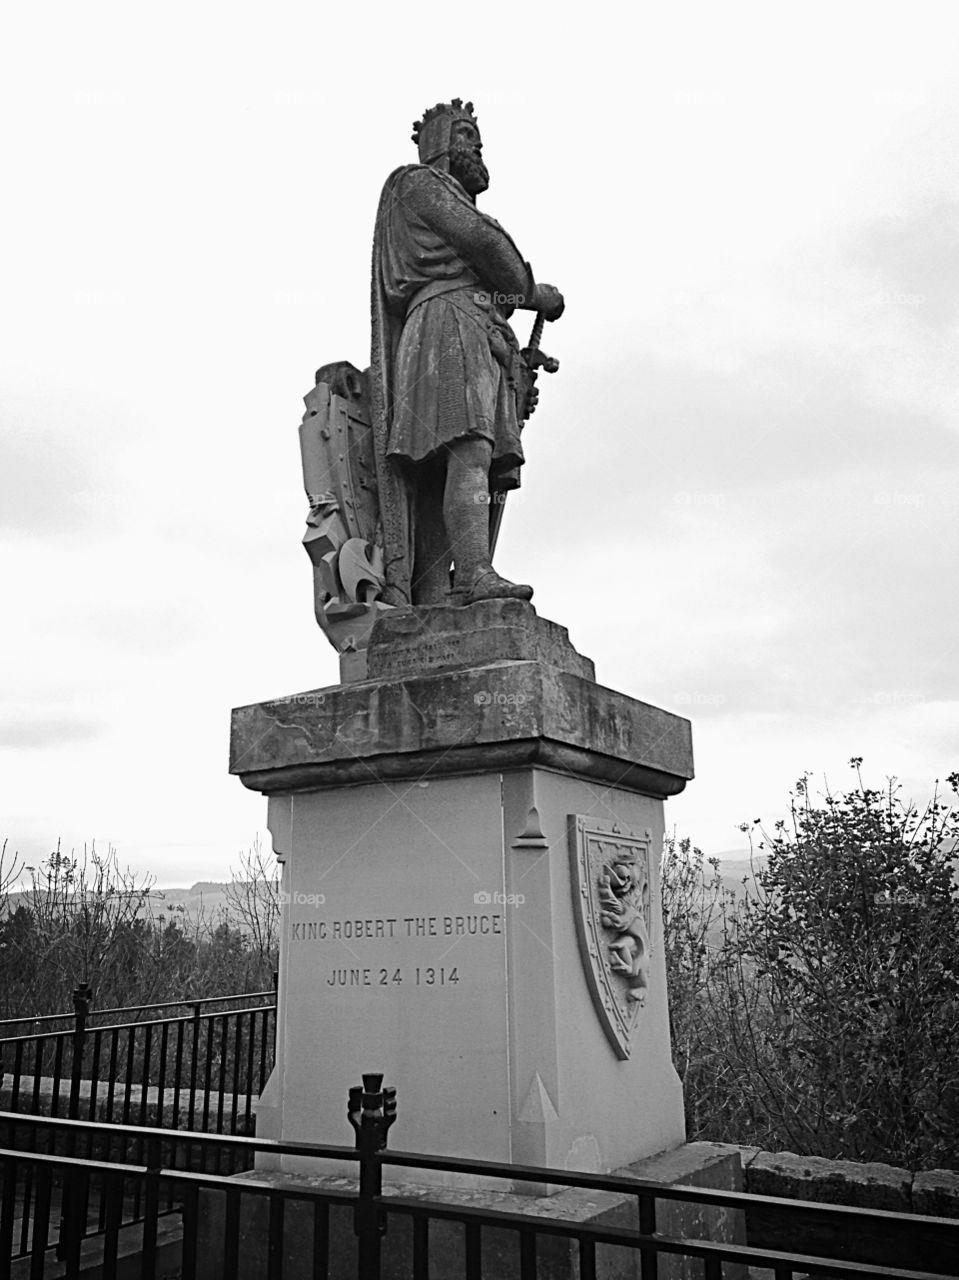 Robert the Bruce statue at Stirling Castle, Scotland